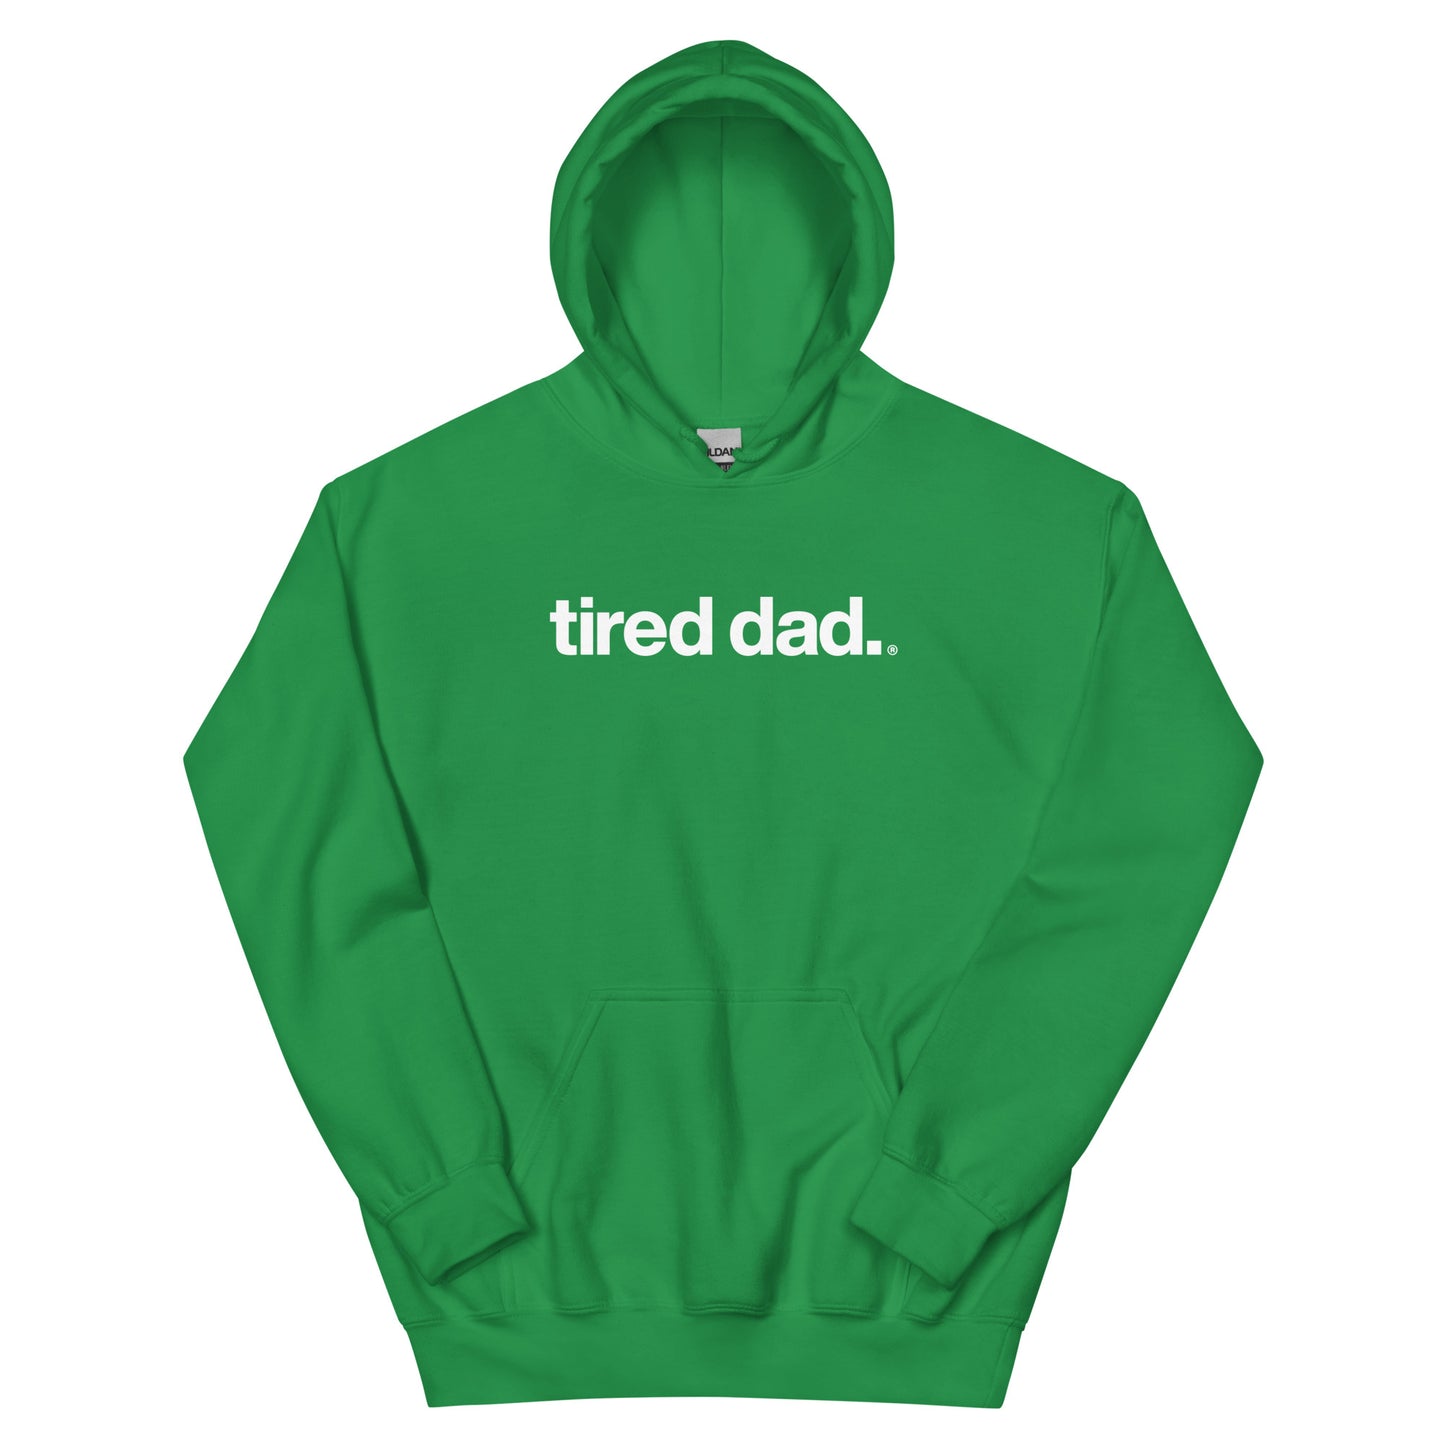 NEW!!! "Keep Showing Up Angel" Tired Dad Hoodie